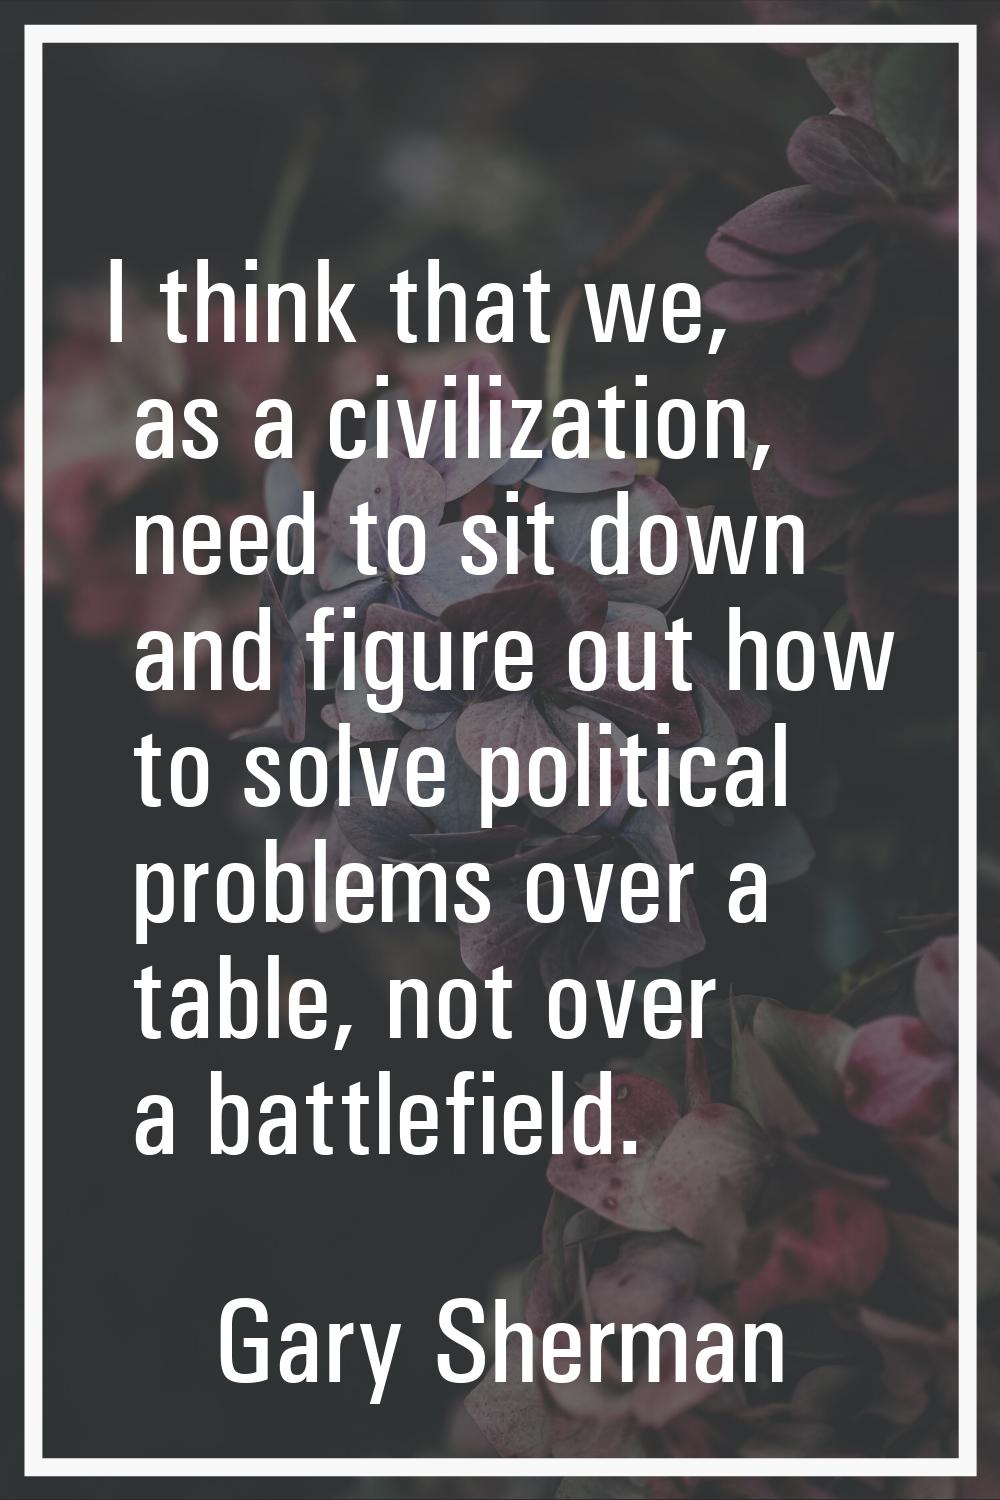 I think that we, as a civilization, need to sit down and figure out how to solve political problems